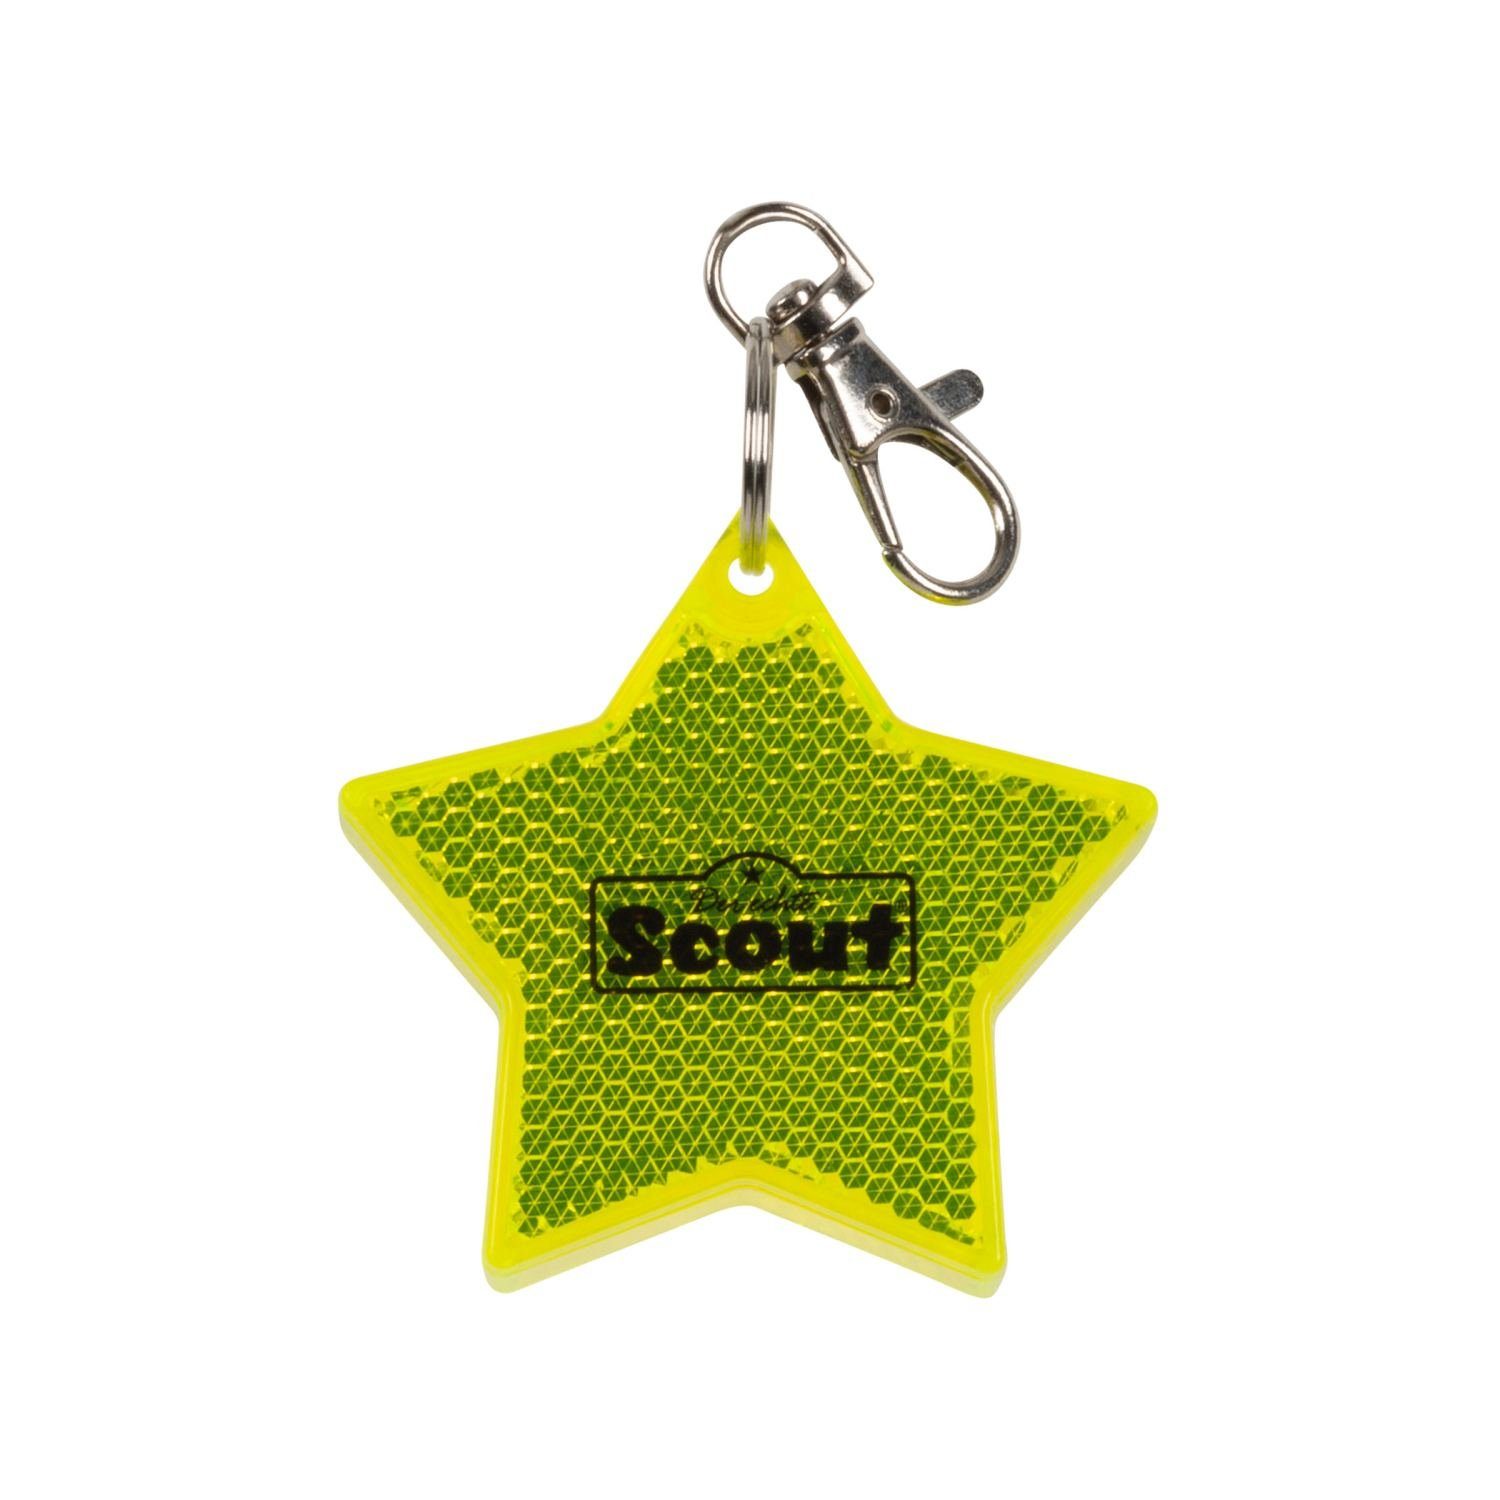 Scout Scout Blinky Star Yellow Babystiefel